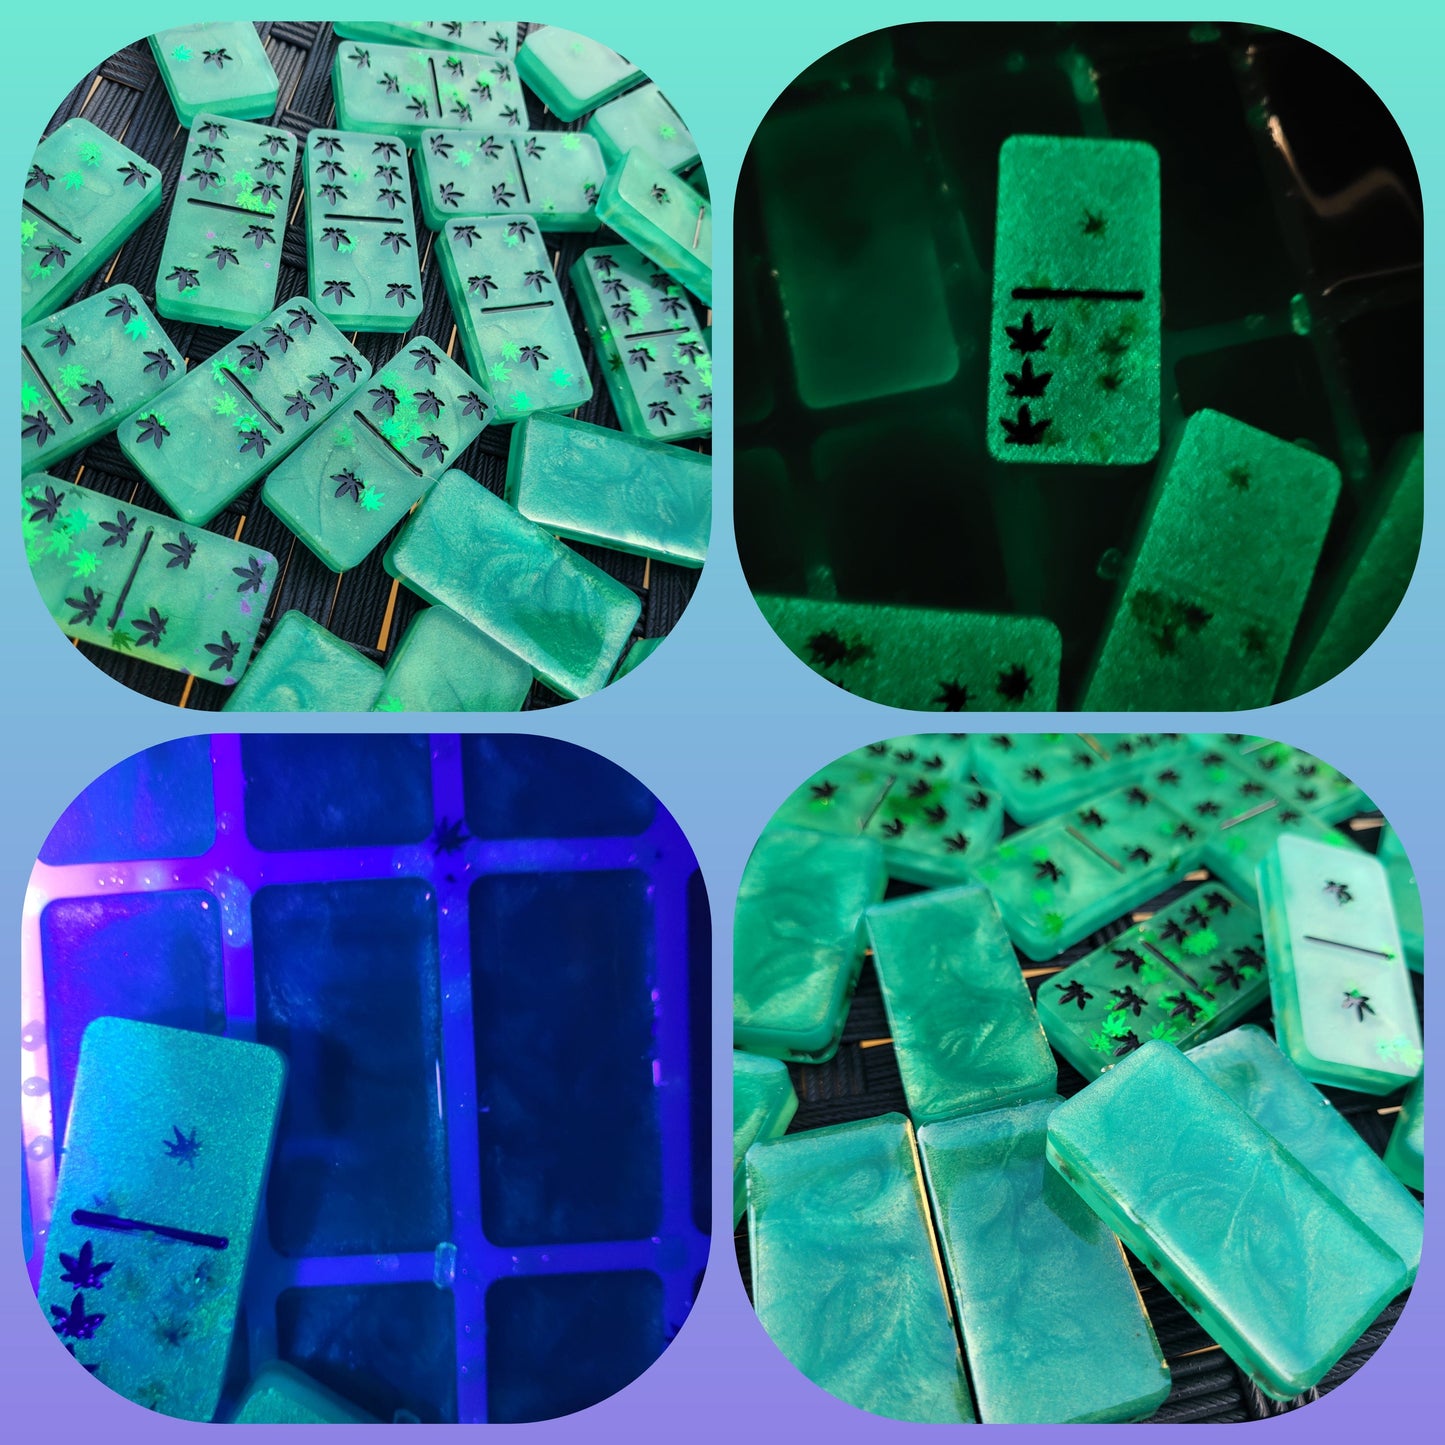 Weed Pip Resin Dominoes- Classic 28 Tile Game - Not Heat Tolerant